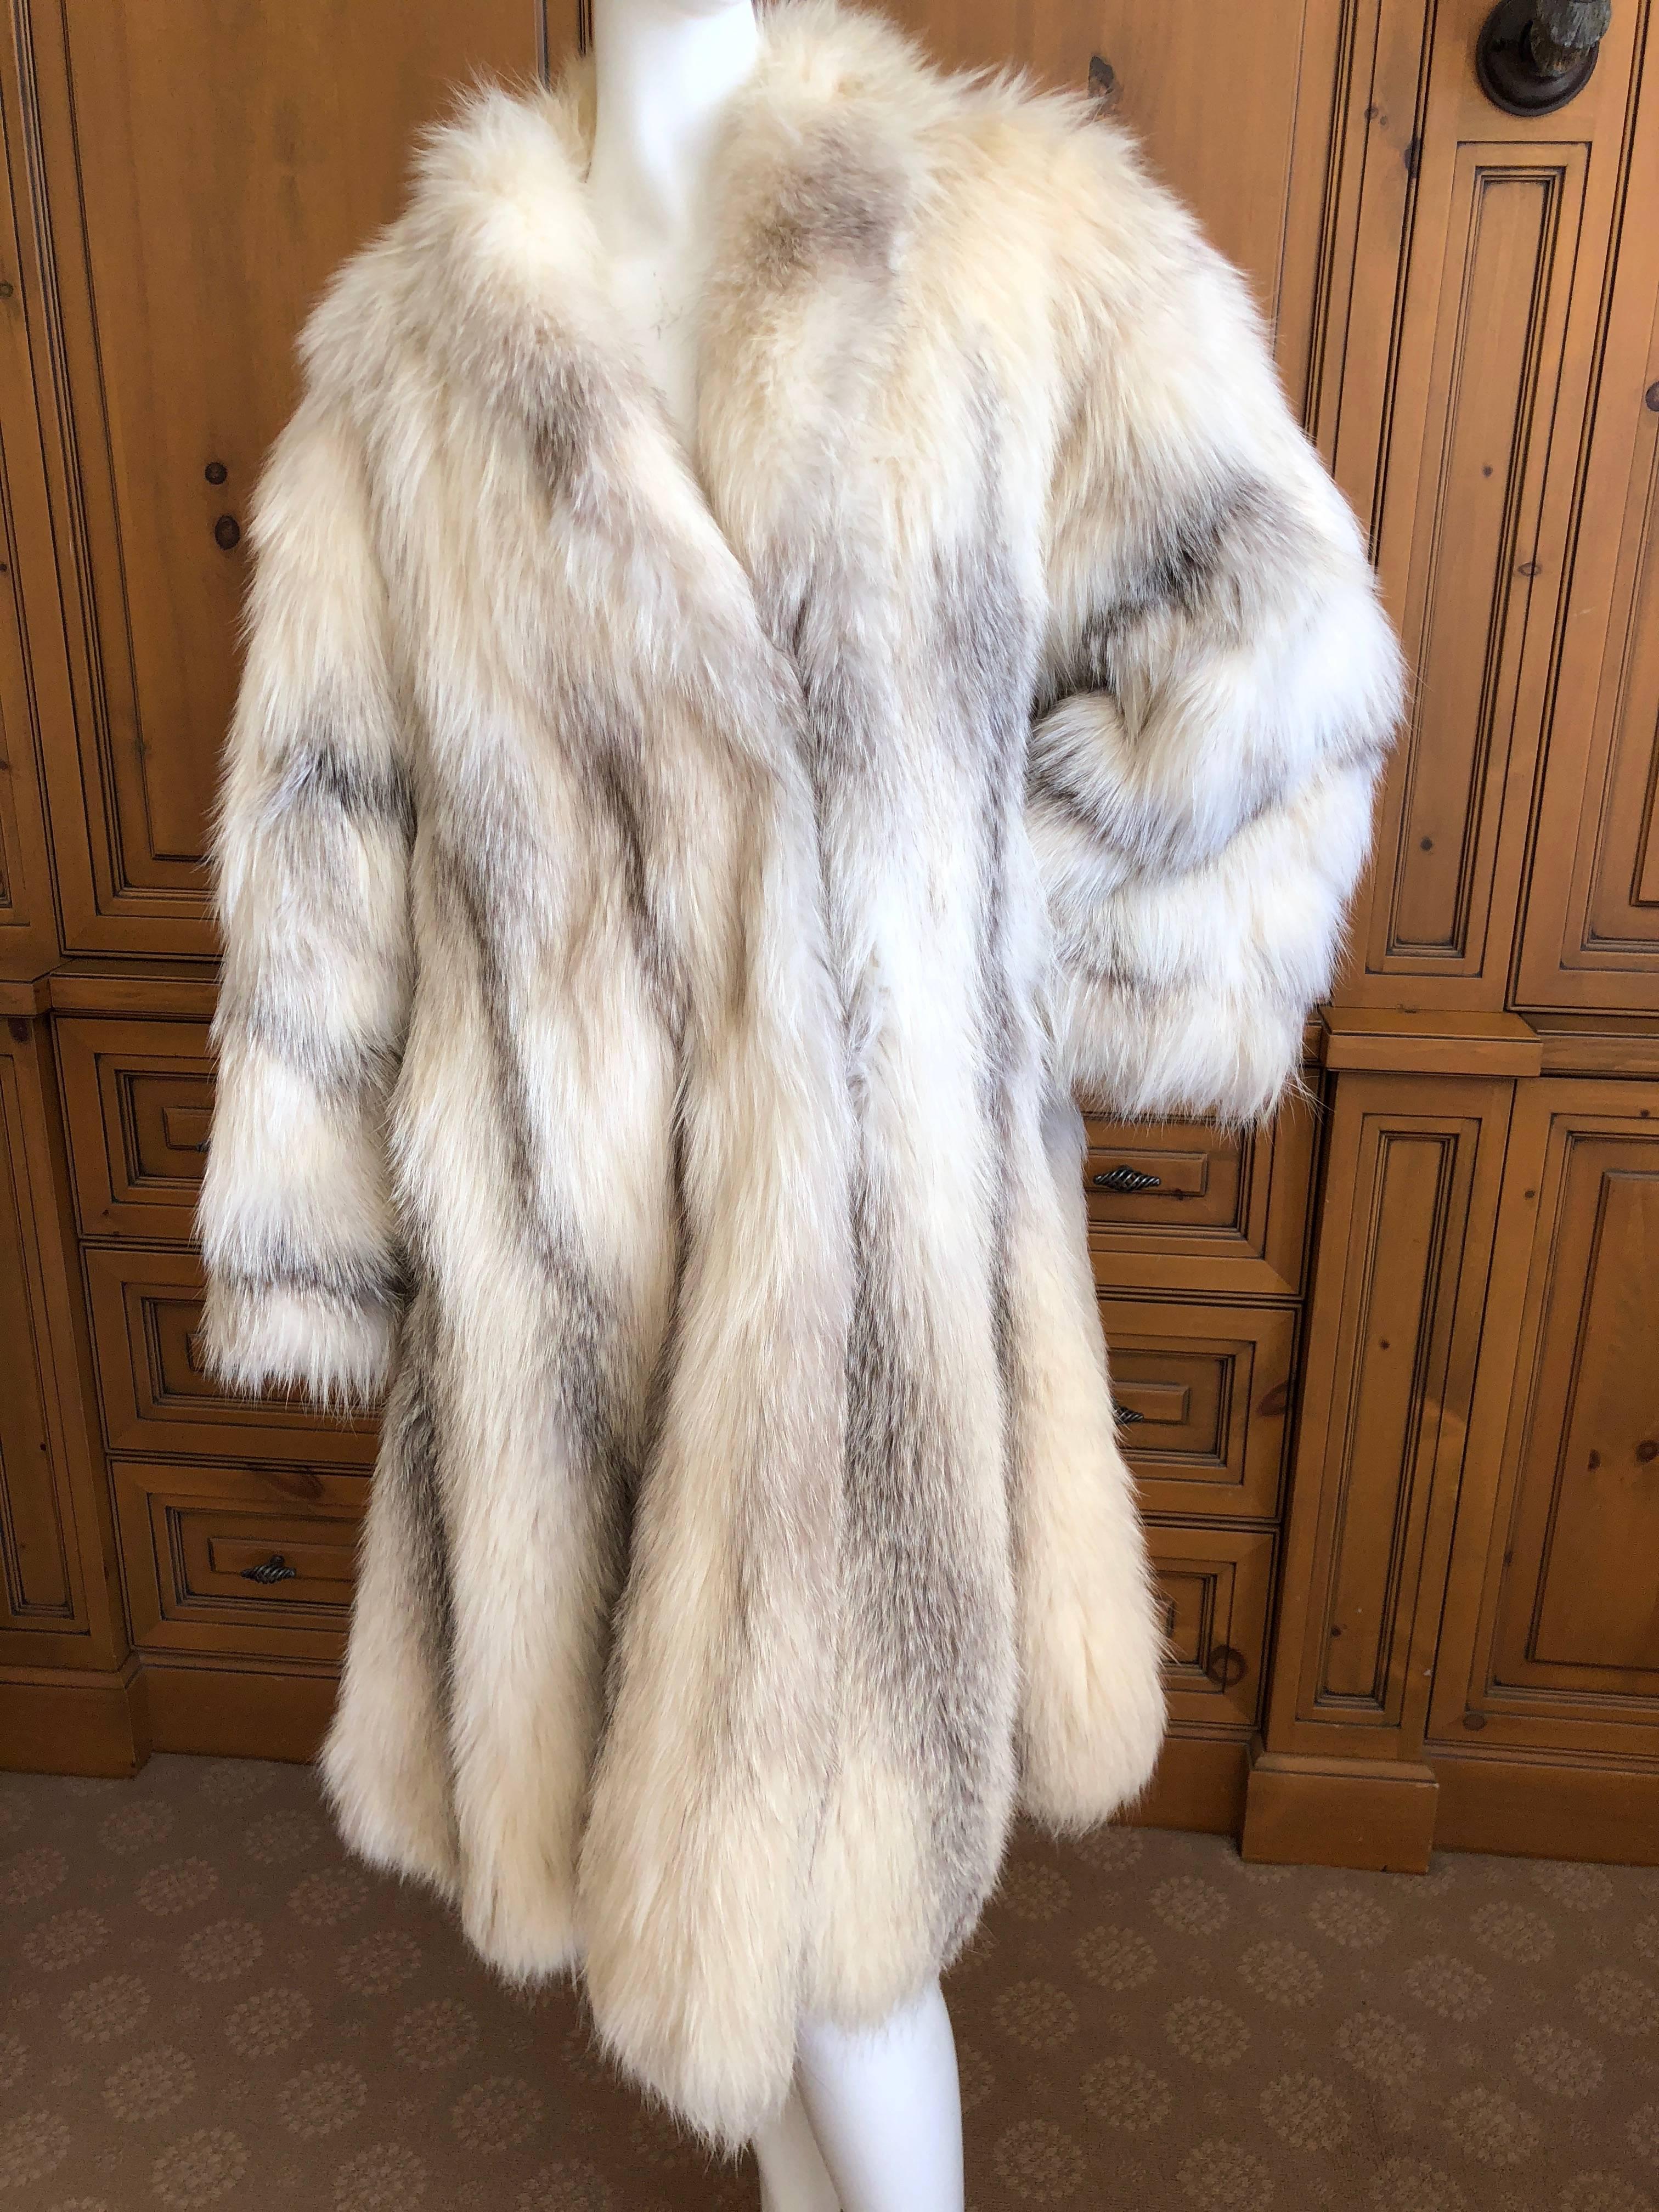 Gianni Versace Furs 1980's genuine fox fur swing style coat with wonderful generous proportions.
The sweep measures 110